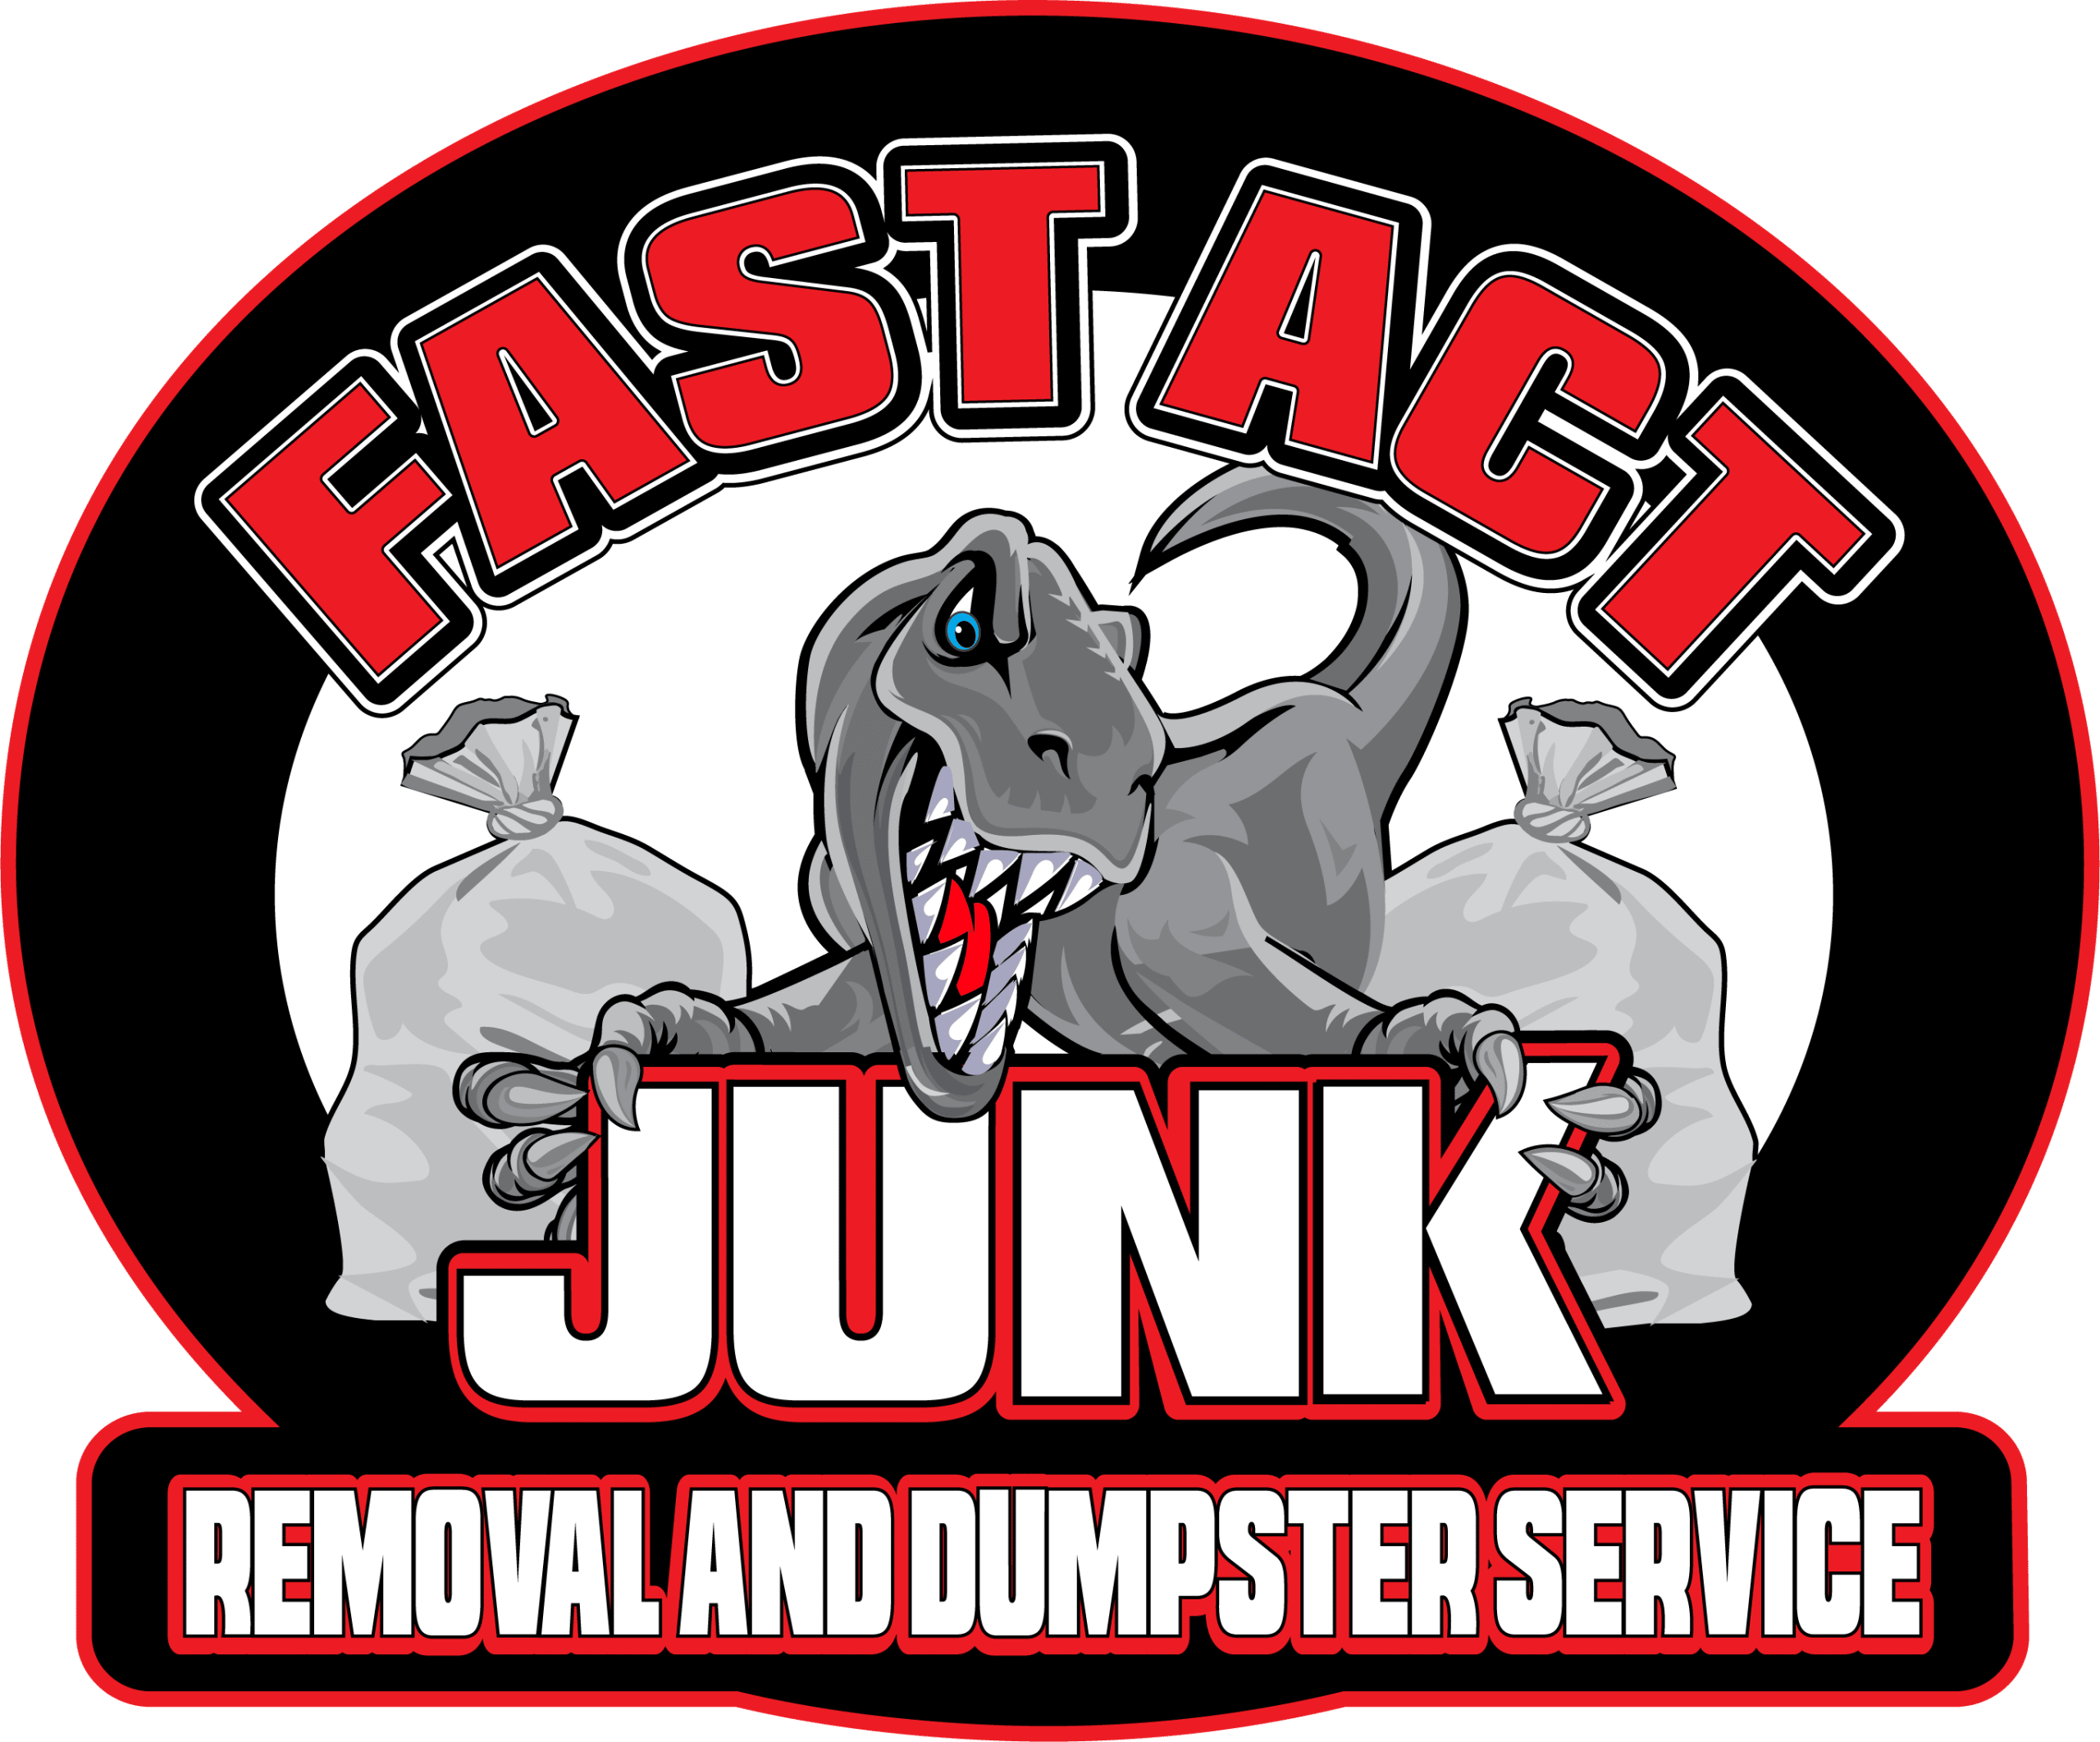 Junk Haulers Fast Act Junk Removal And Dumpster Service